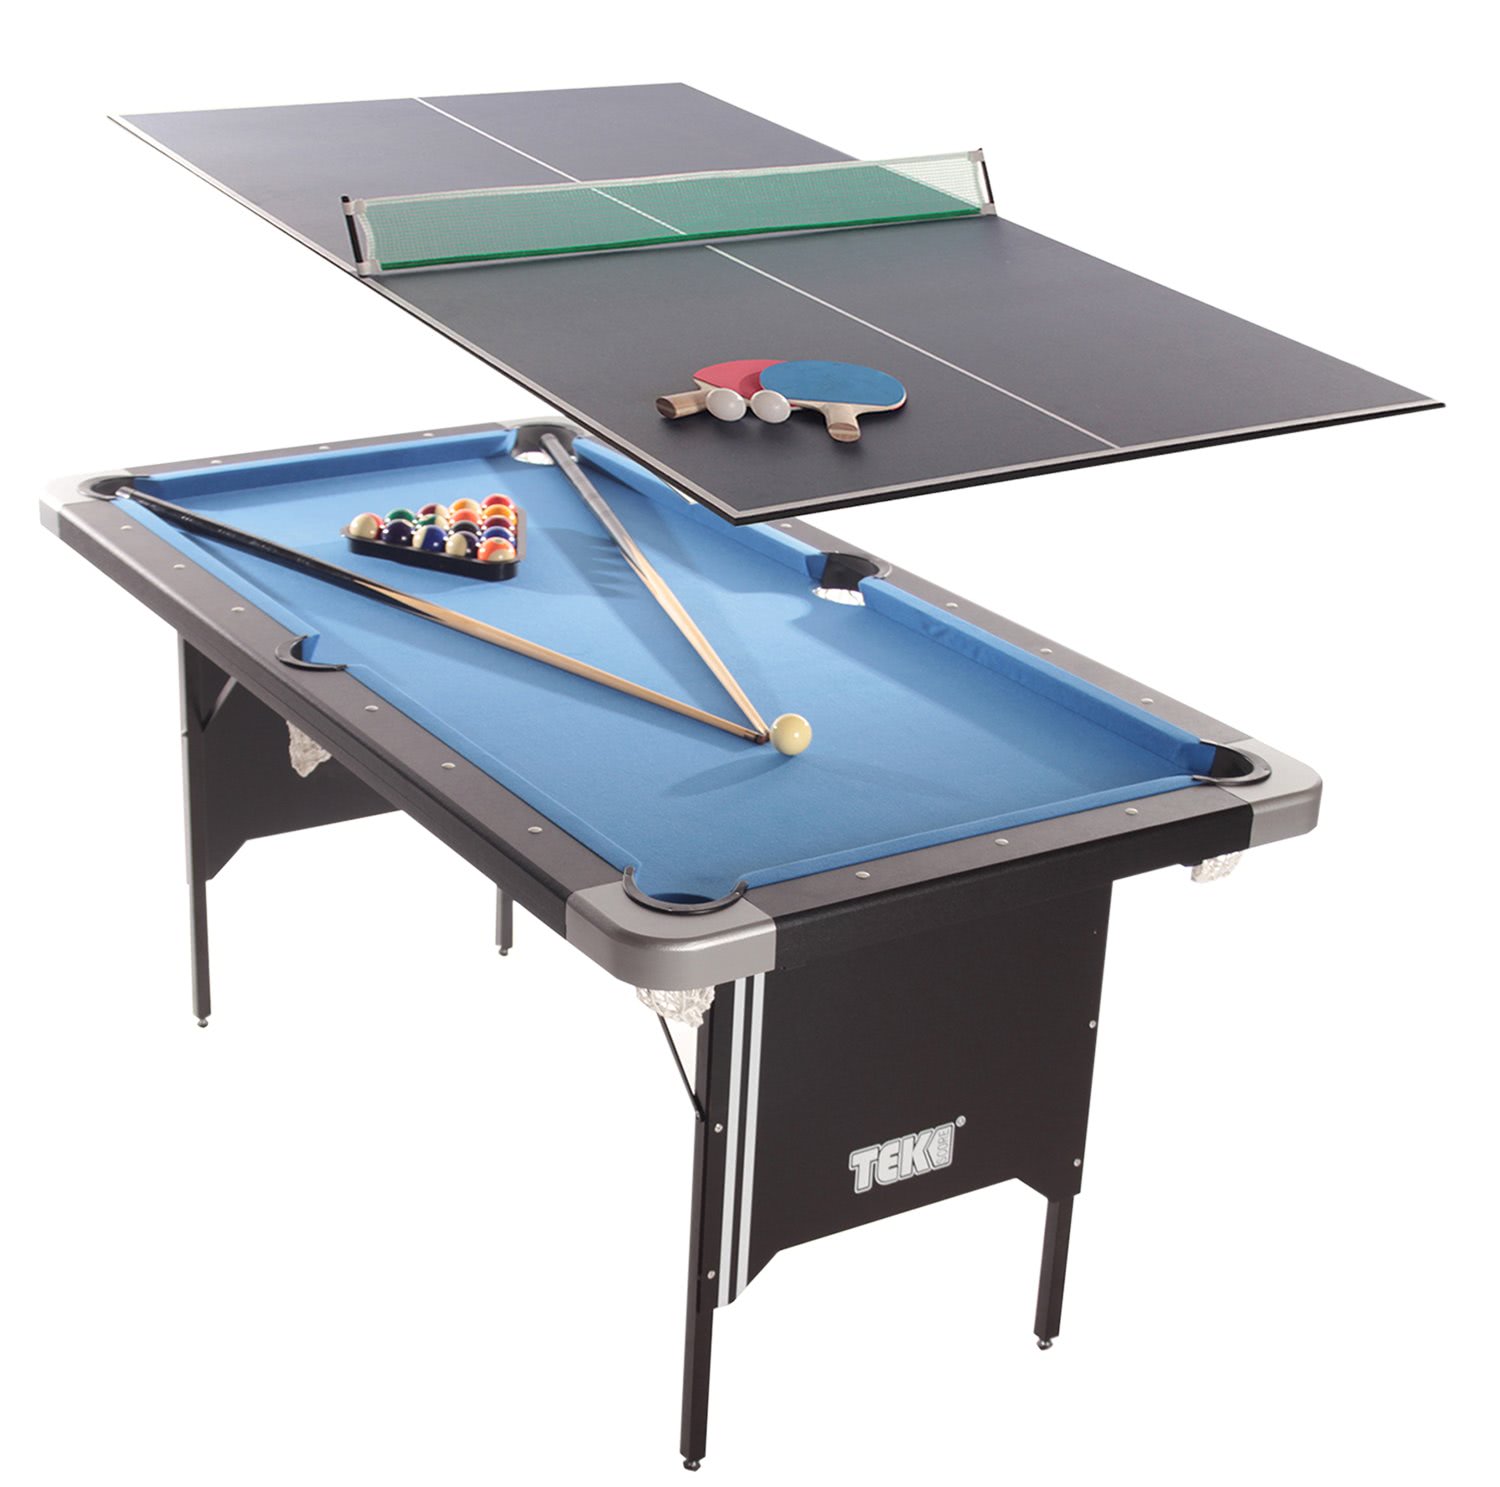 Tekscore Folding Pool Table with Table Tennis Top